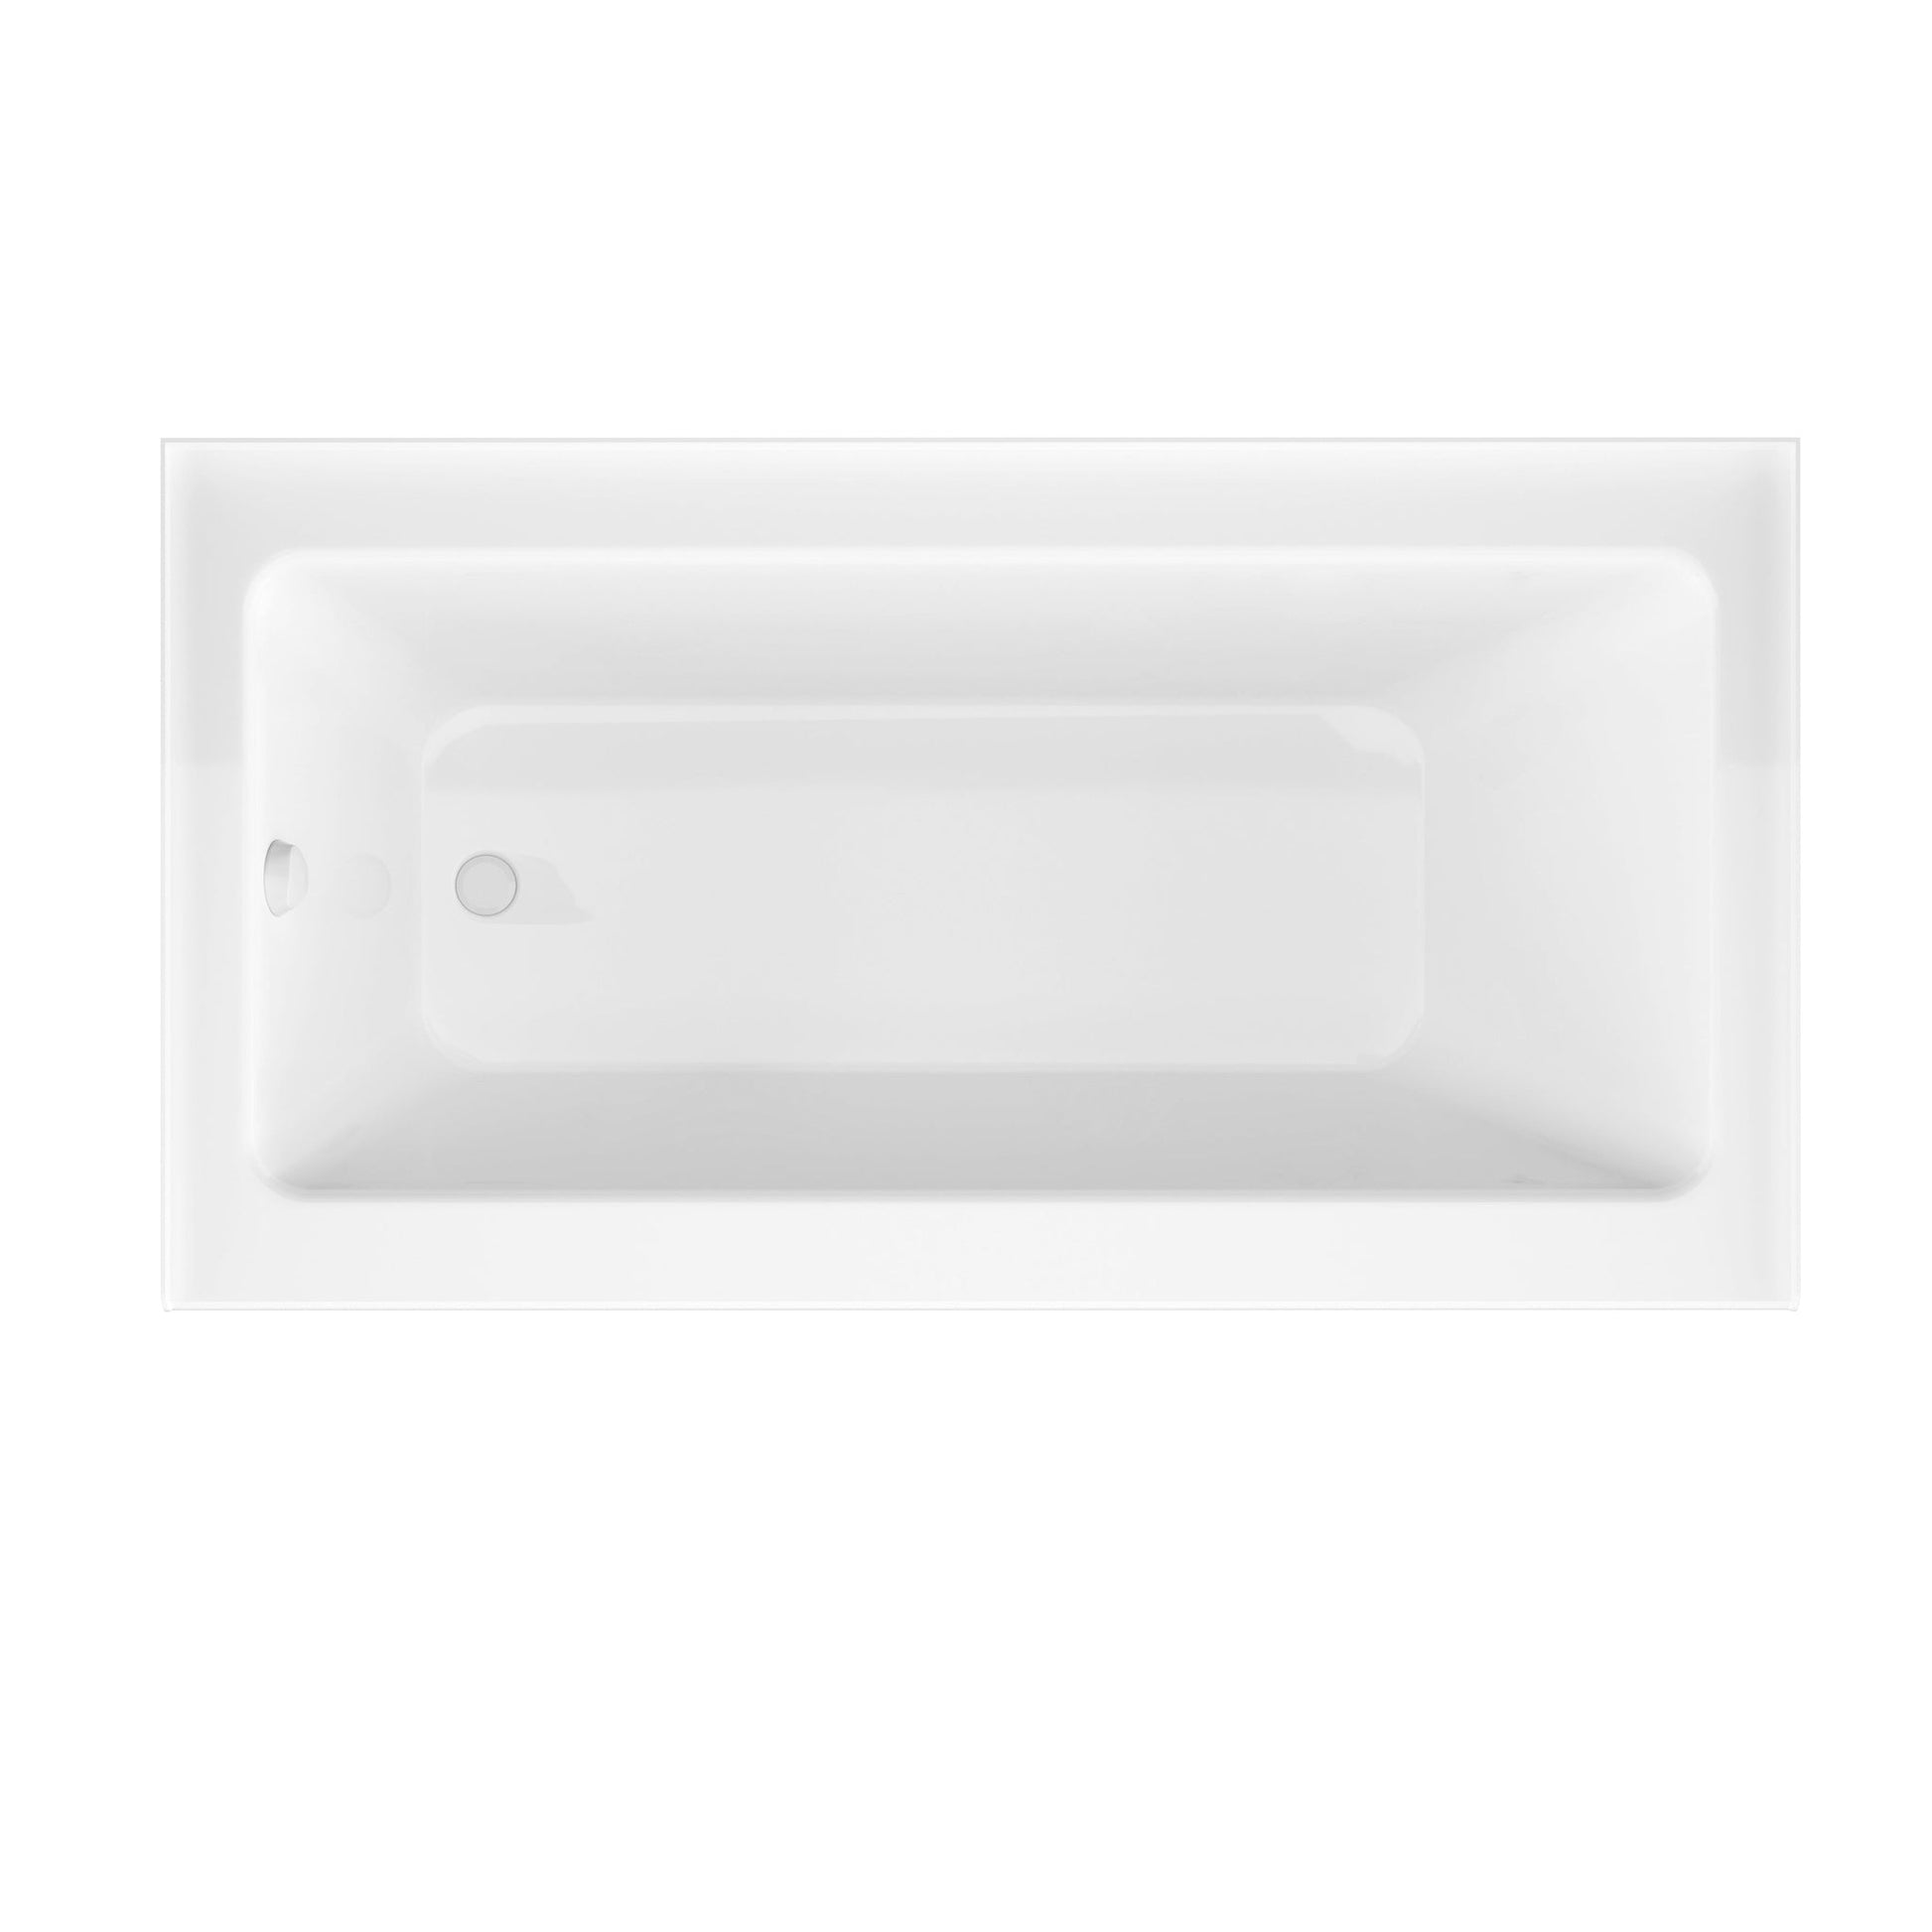 ANZZI Grand Series White "60 x 30" Alcove Left Drain Rectangular Bathtub With Built-In Flange and Frameless Polished Chrome Hinged Door